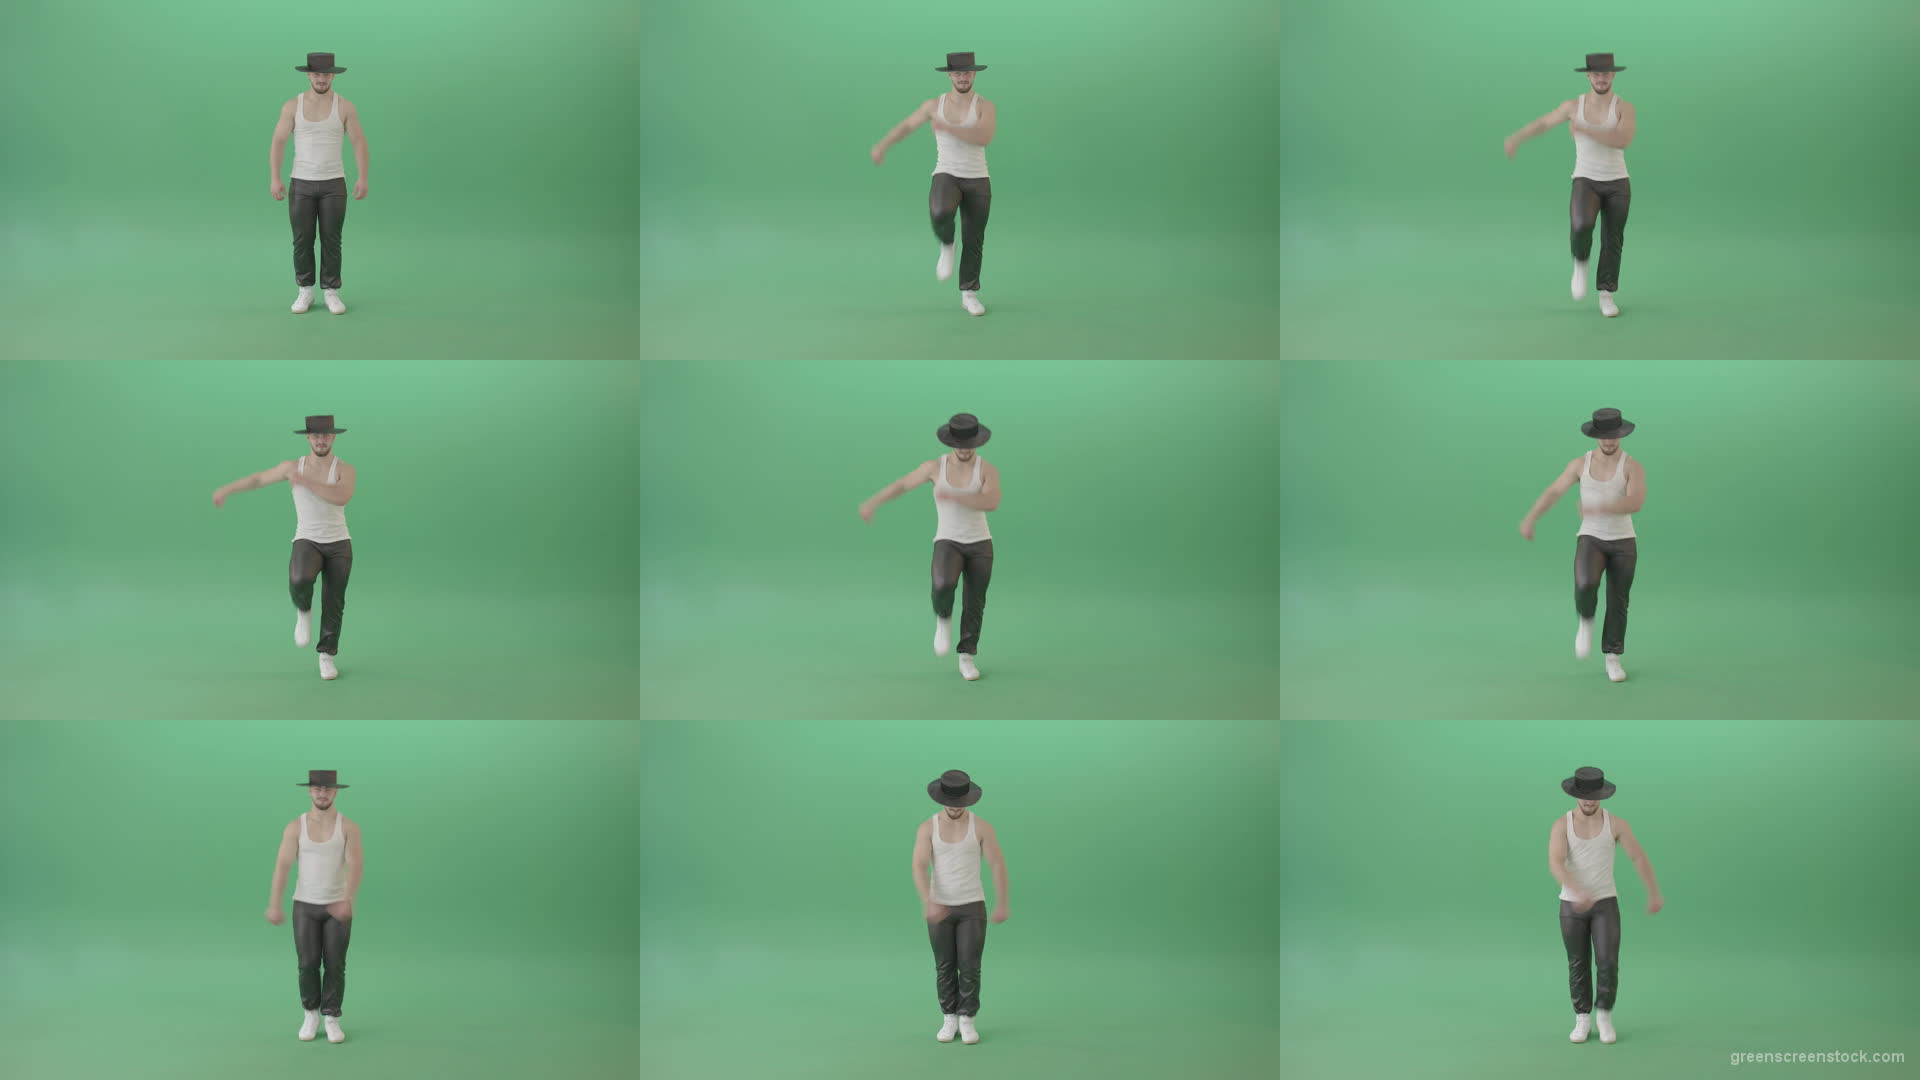 Funny-Man-marching-in-beat-isolated-on-Green-Screen-Chroma-Key-4K-Video-Footage-1920 Green Screen Stock